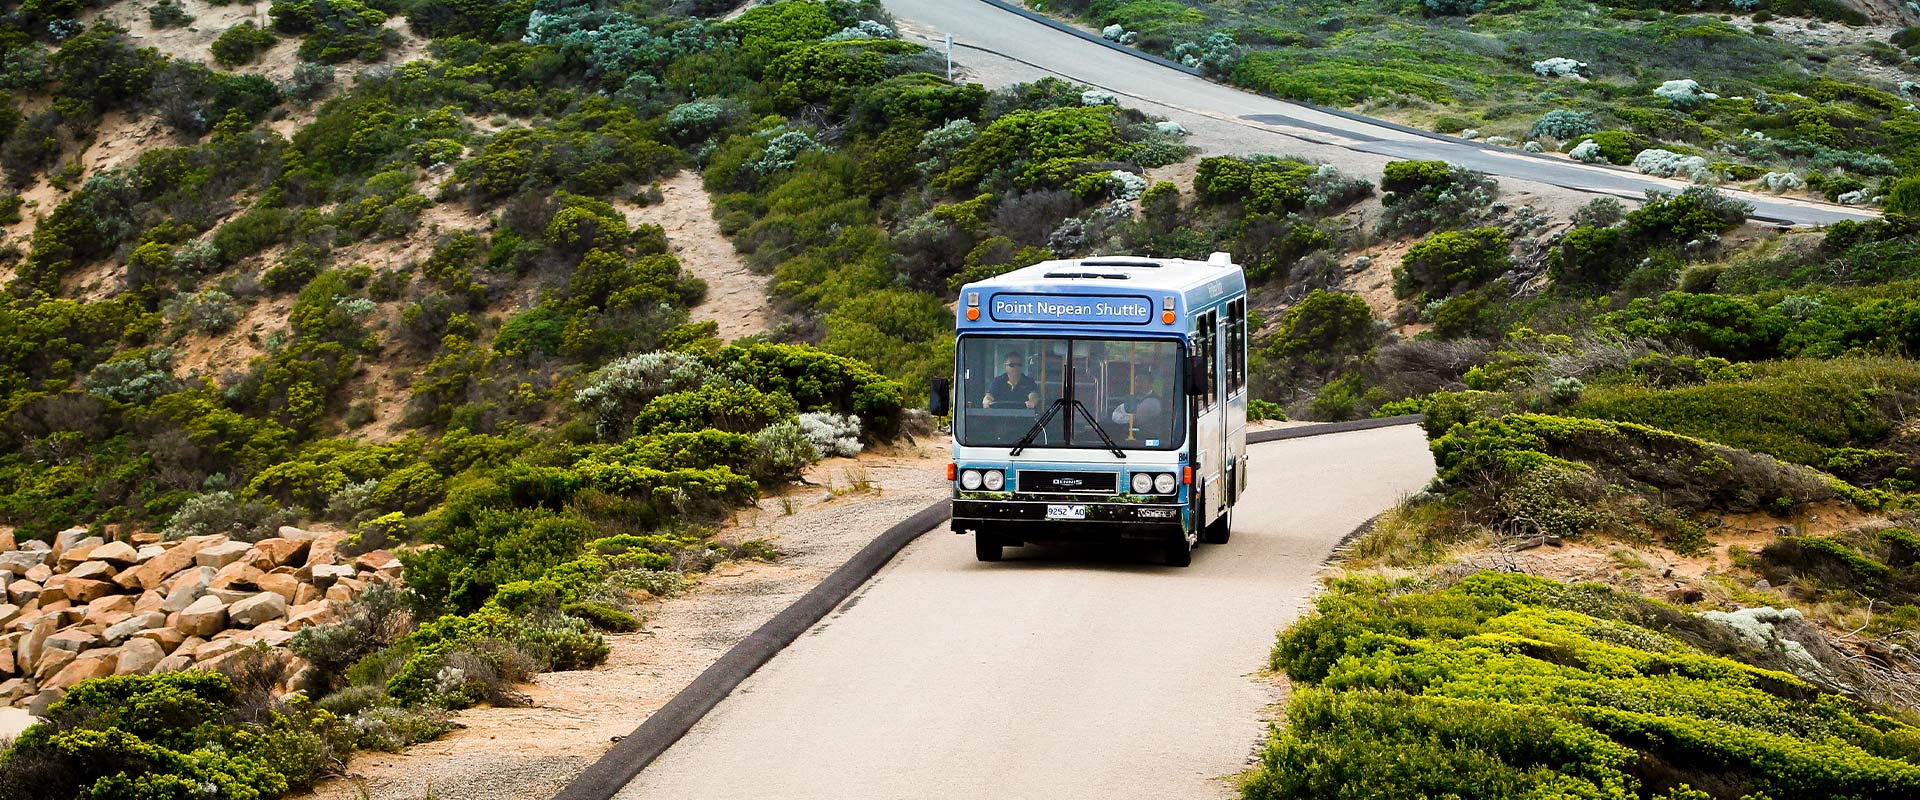 A bus drives along a narrow road with coastal shrubs eithers side